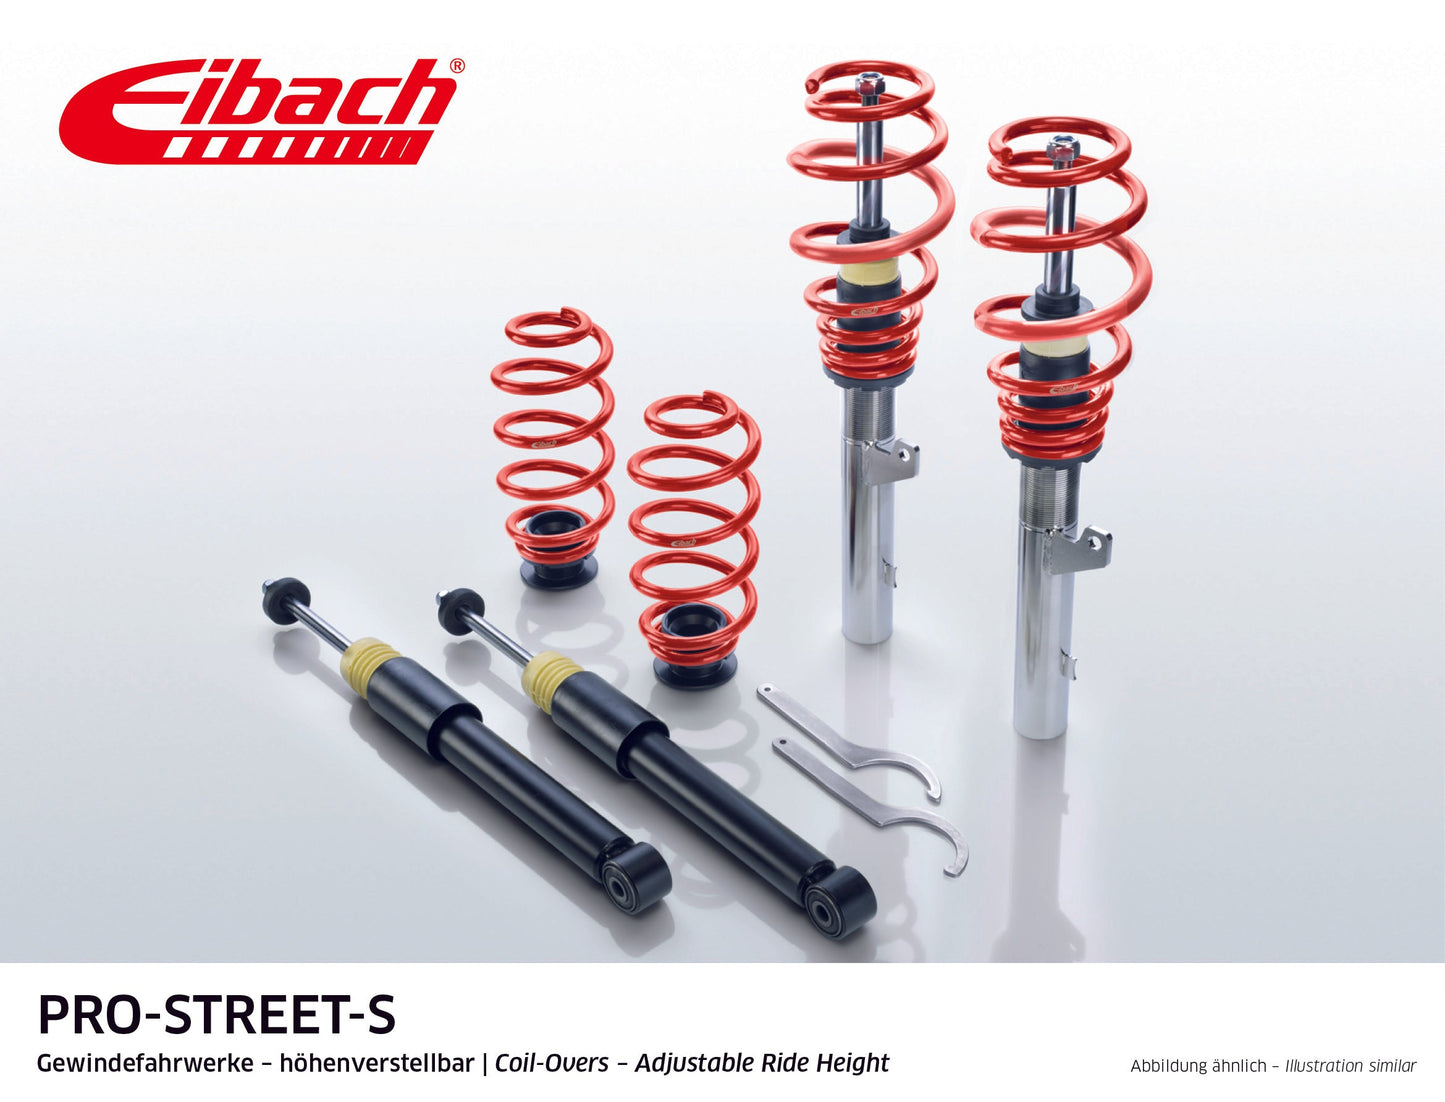 Eibach Pro-Street Coilover (PSS65-15-028-02-22) at £1438.41